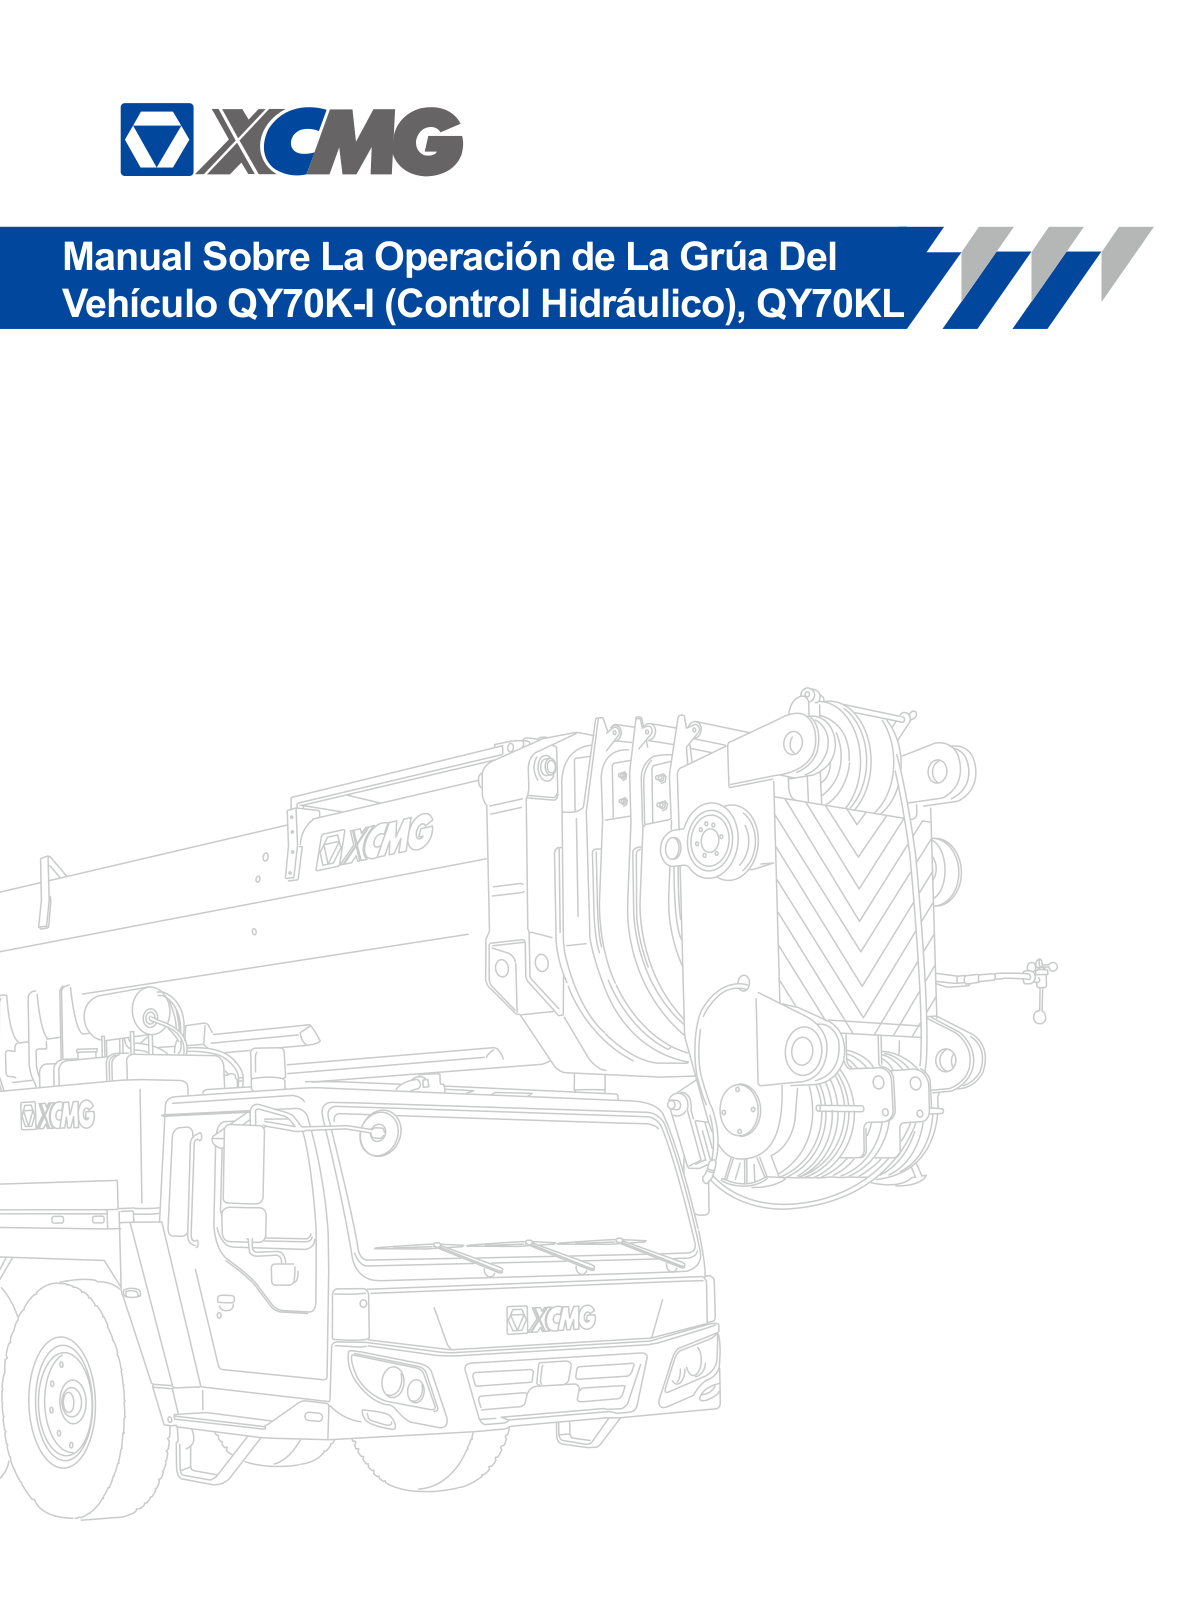 XCMG QY70KL Operation Manual